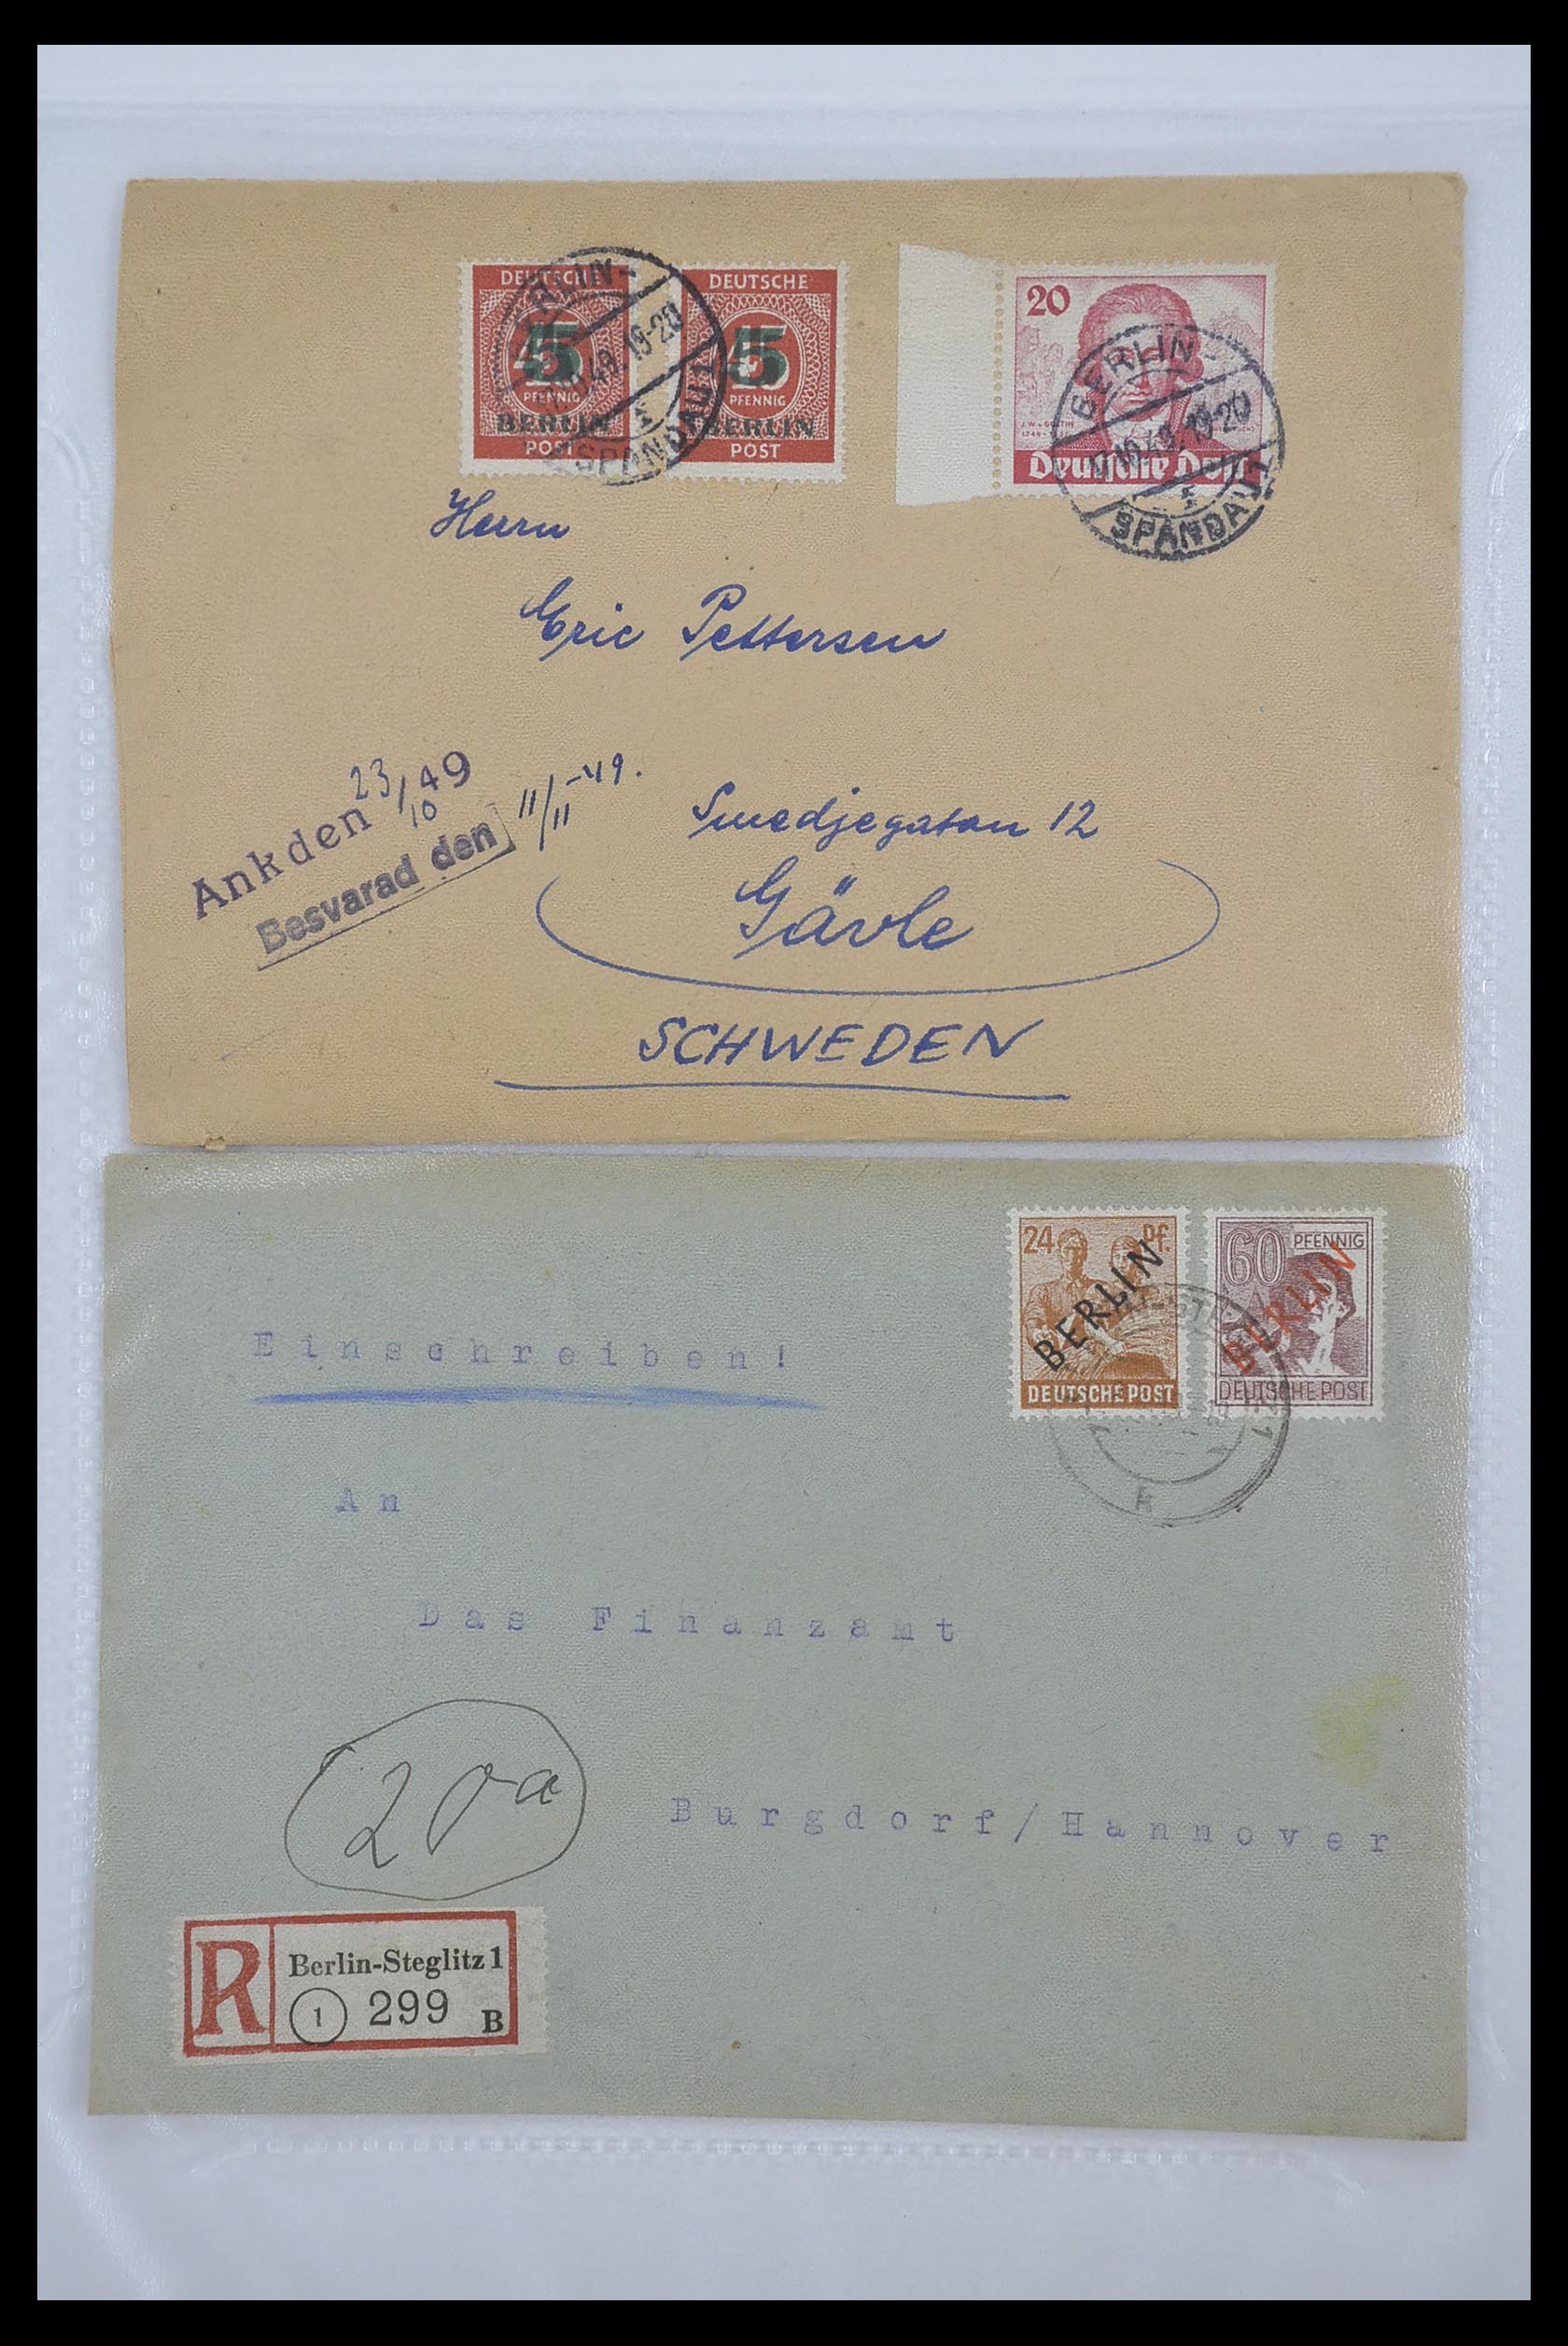 33290 017 - Stamp collection 33290 Berlin covers 1948-1957.